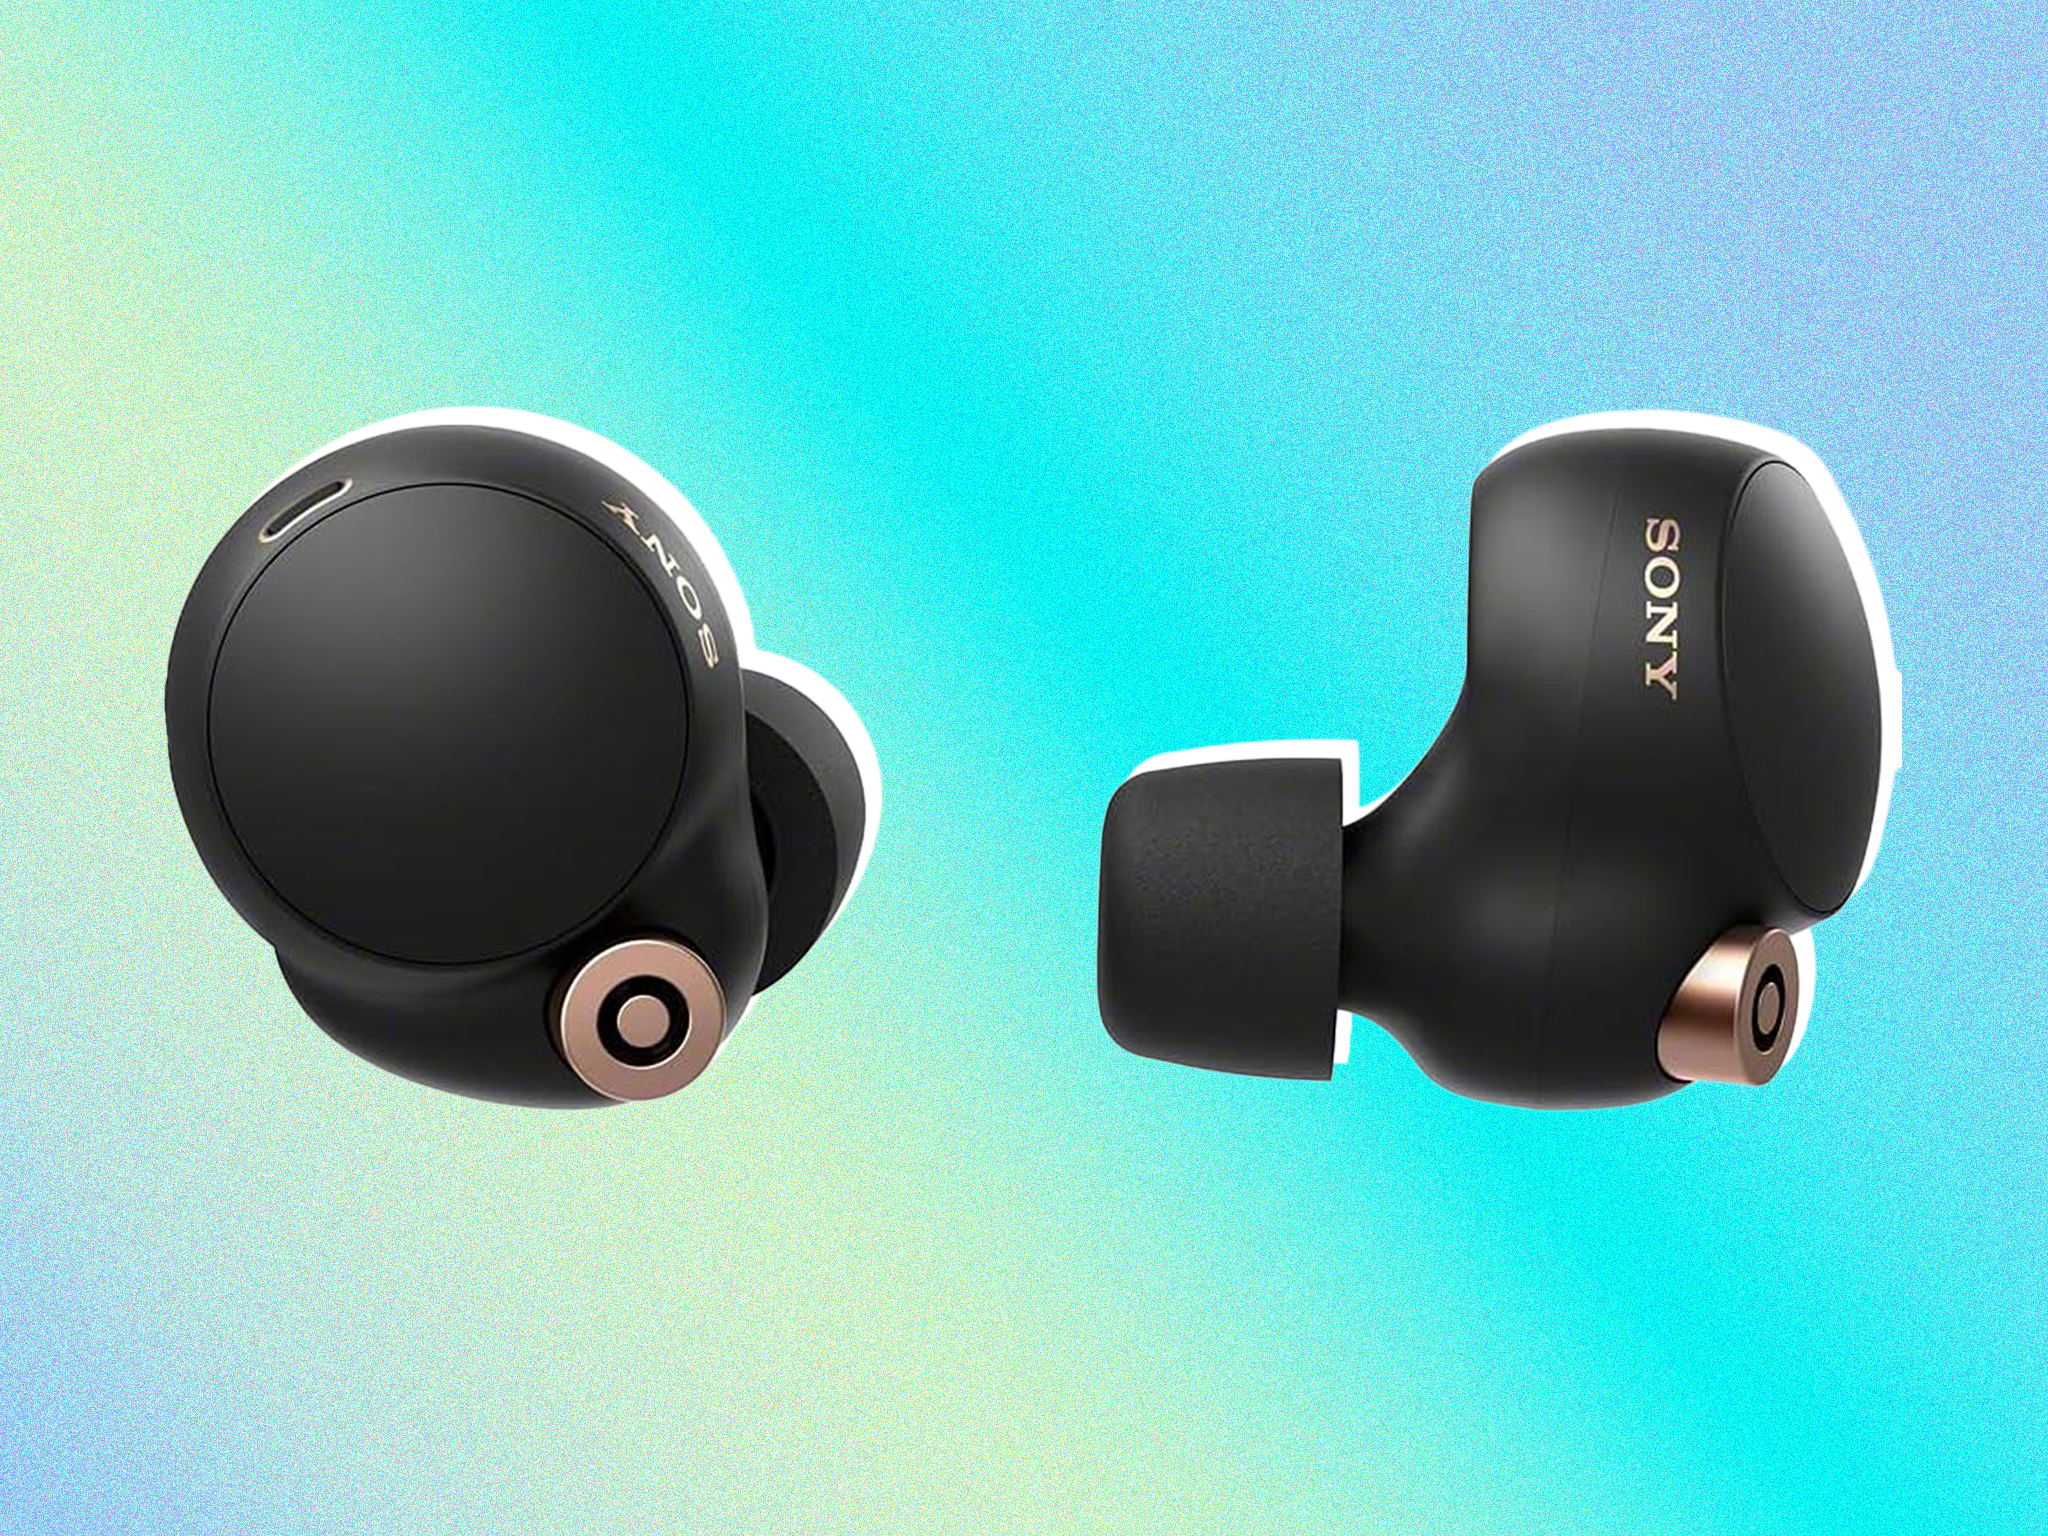 A tried and tested IndyBest buy, our reviewer said: ‘These earphones are a cut above every other rival out there’